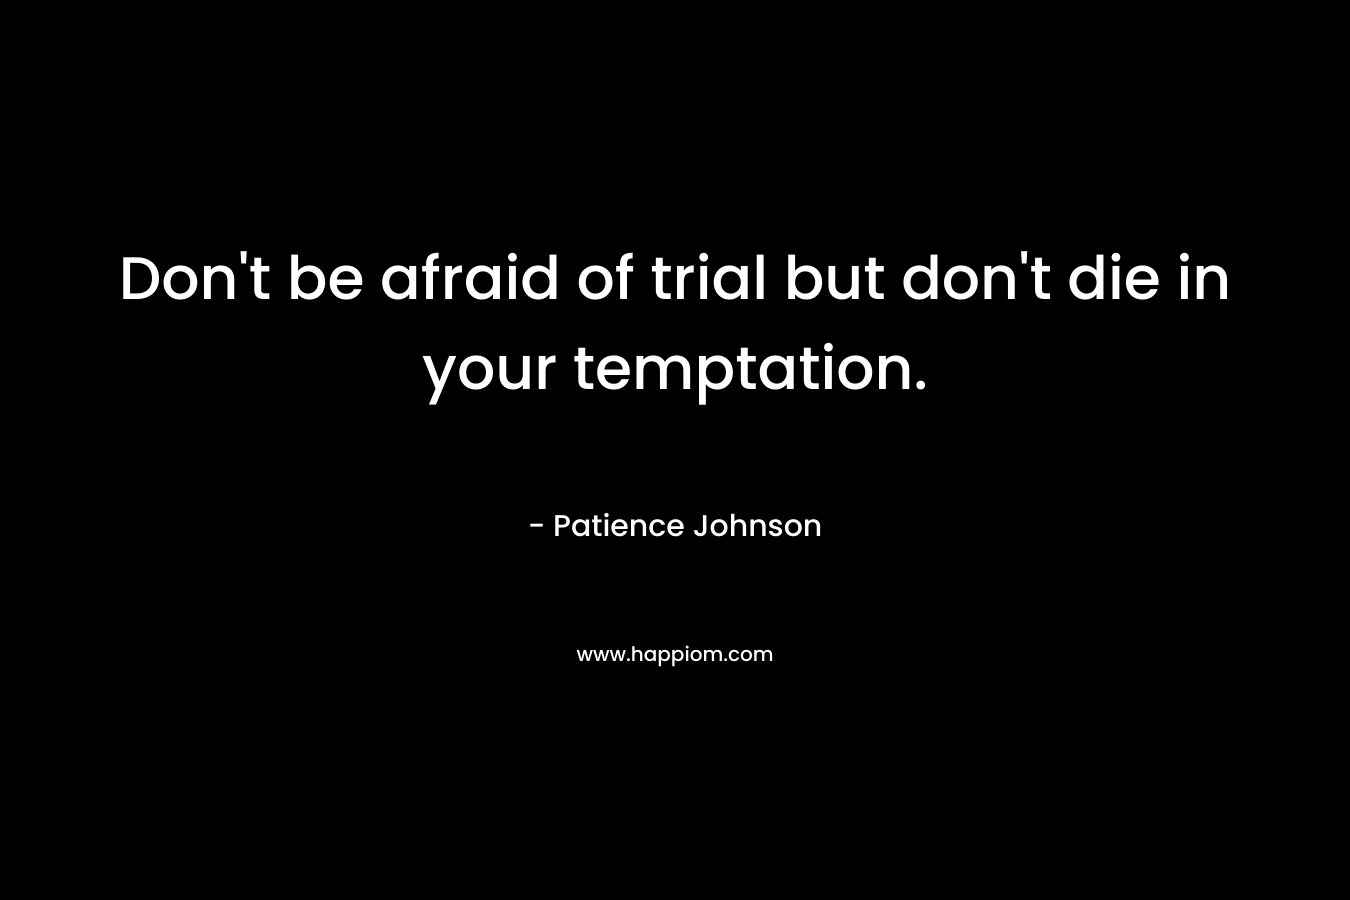 Don't be afraid of trial but don't die in your temptation.